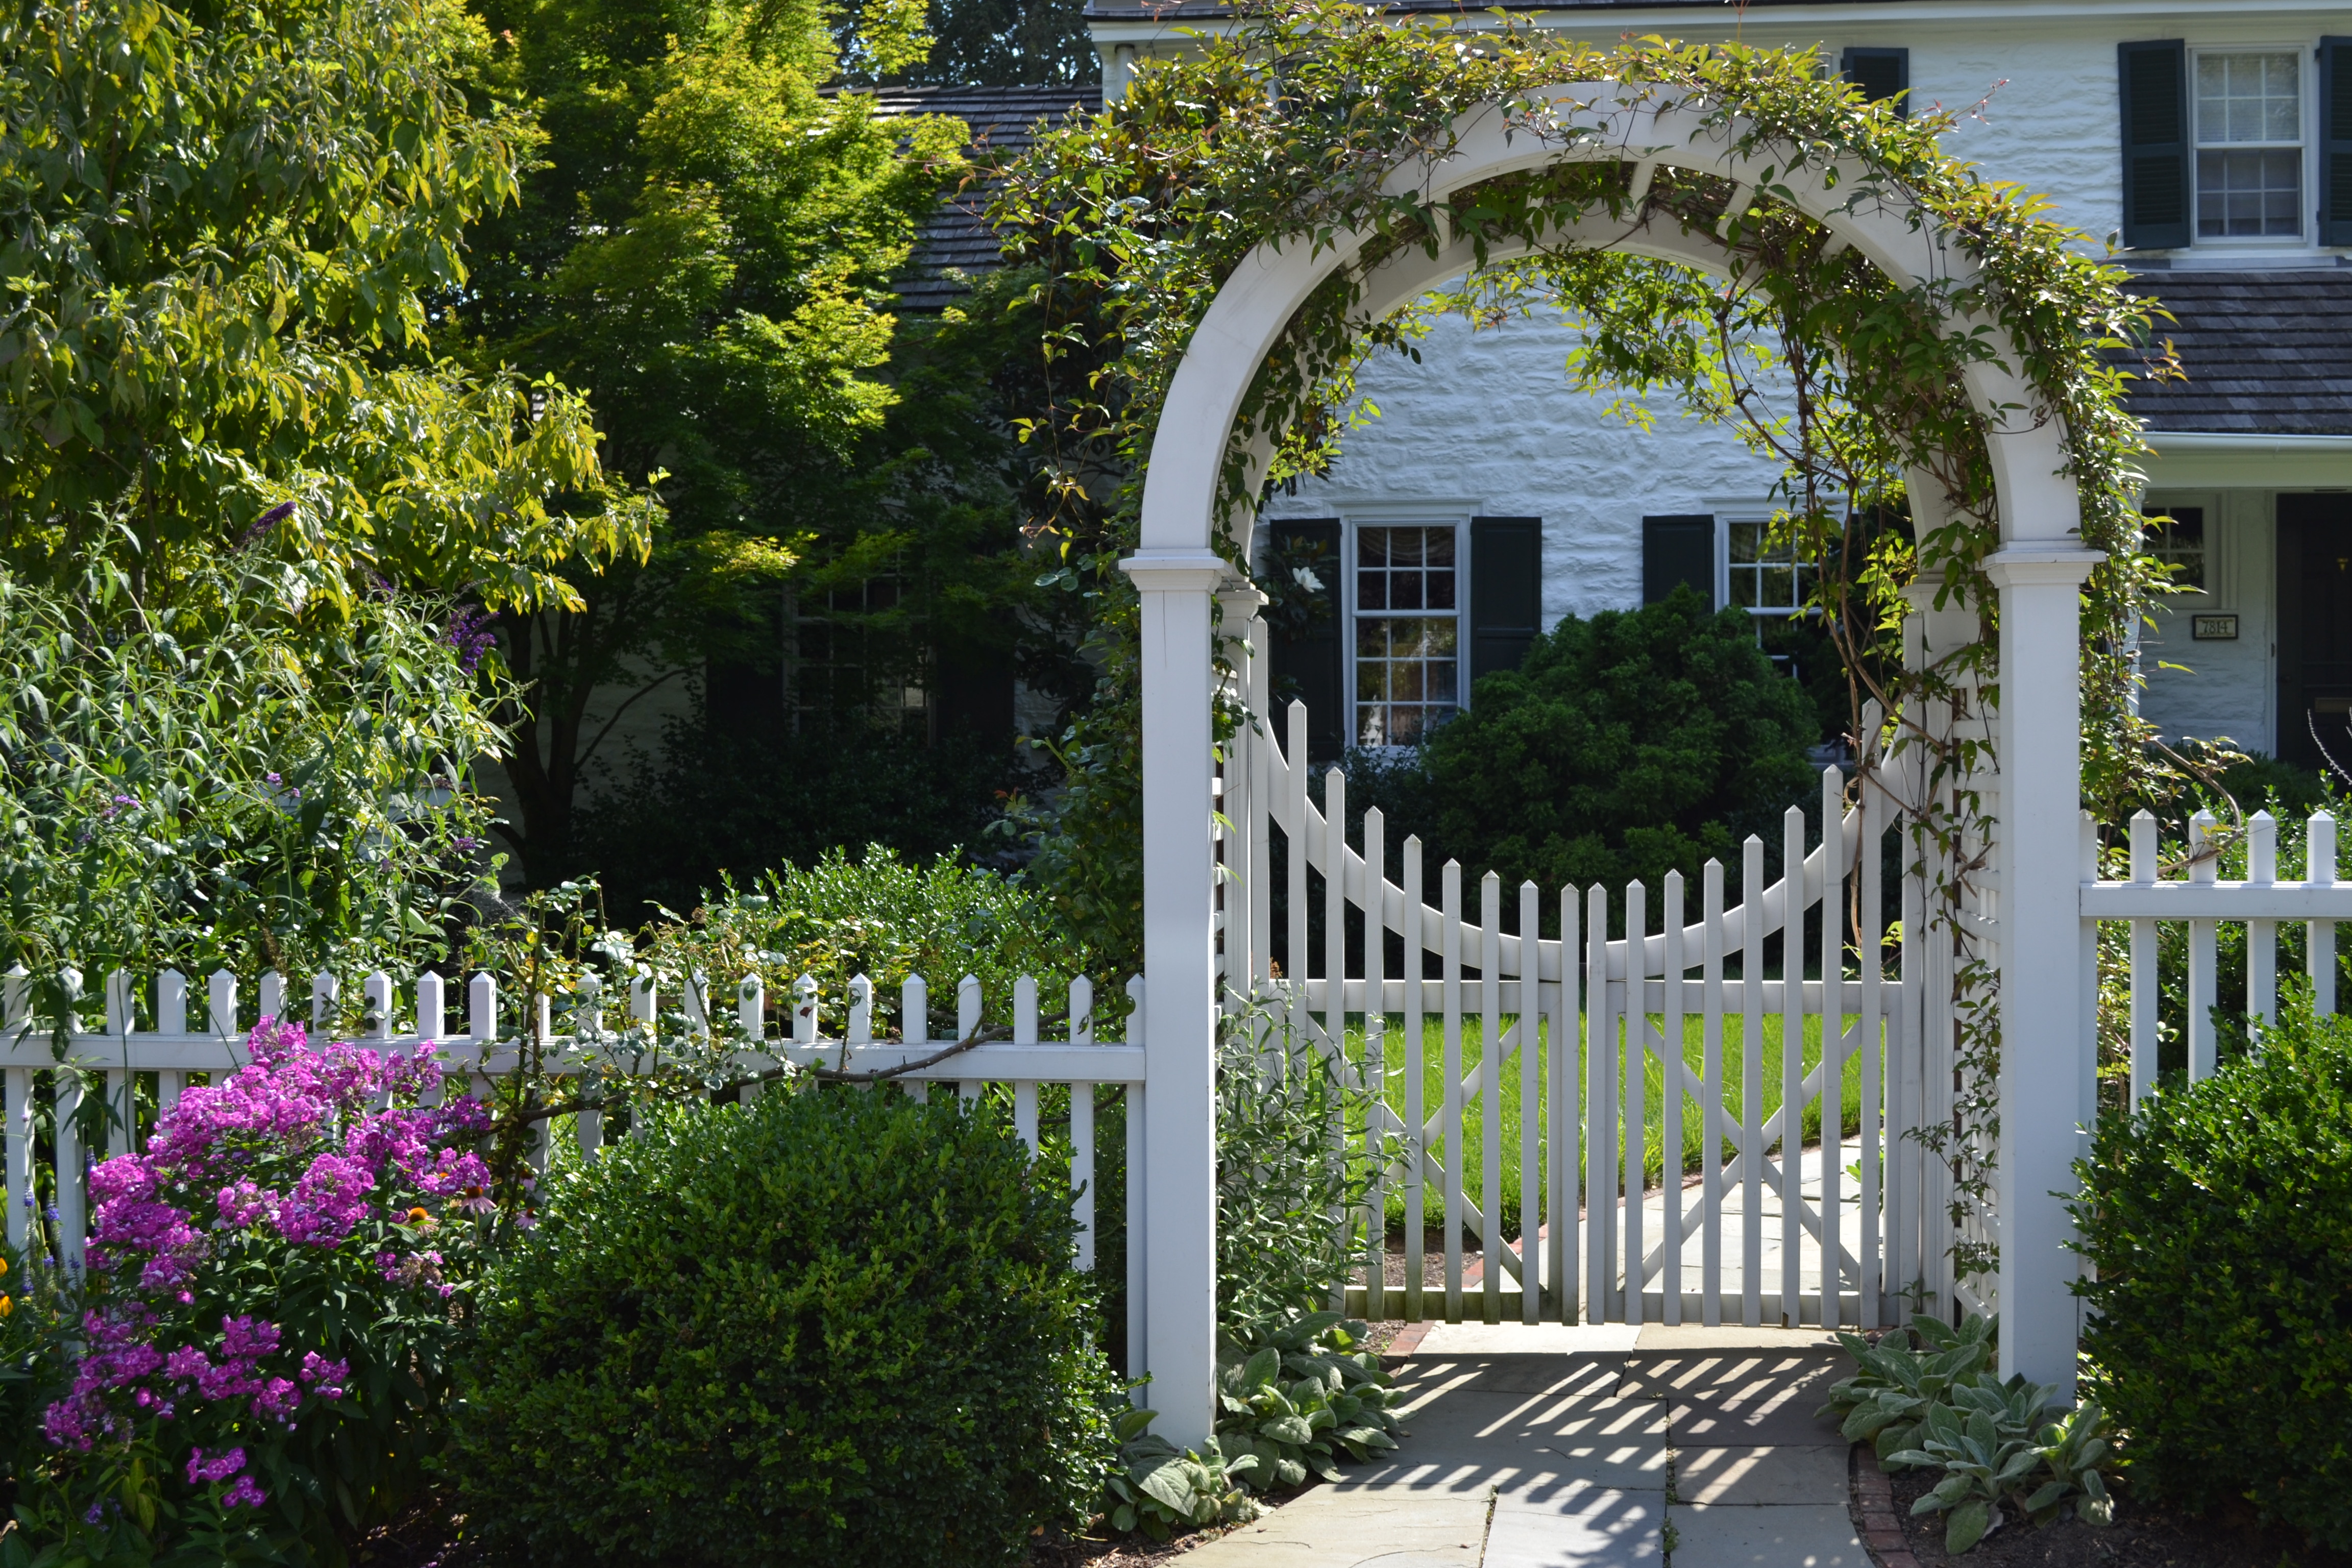 Entrance Arbor with picket gate and fence